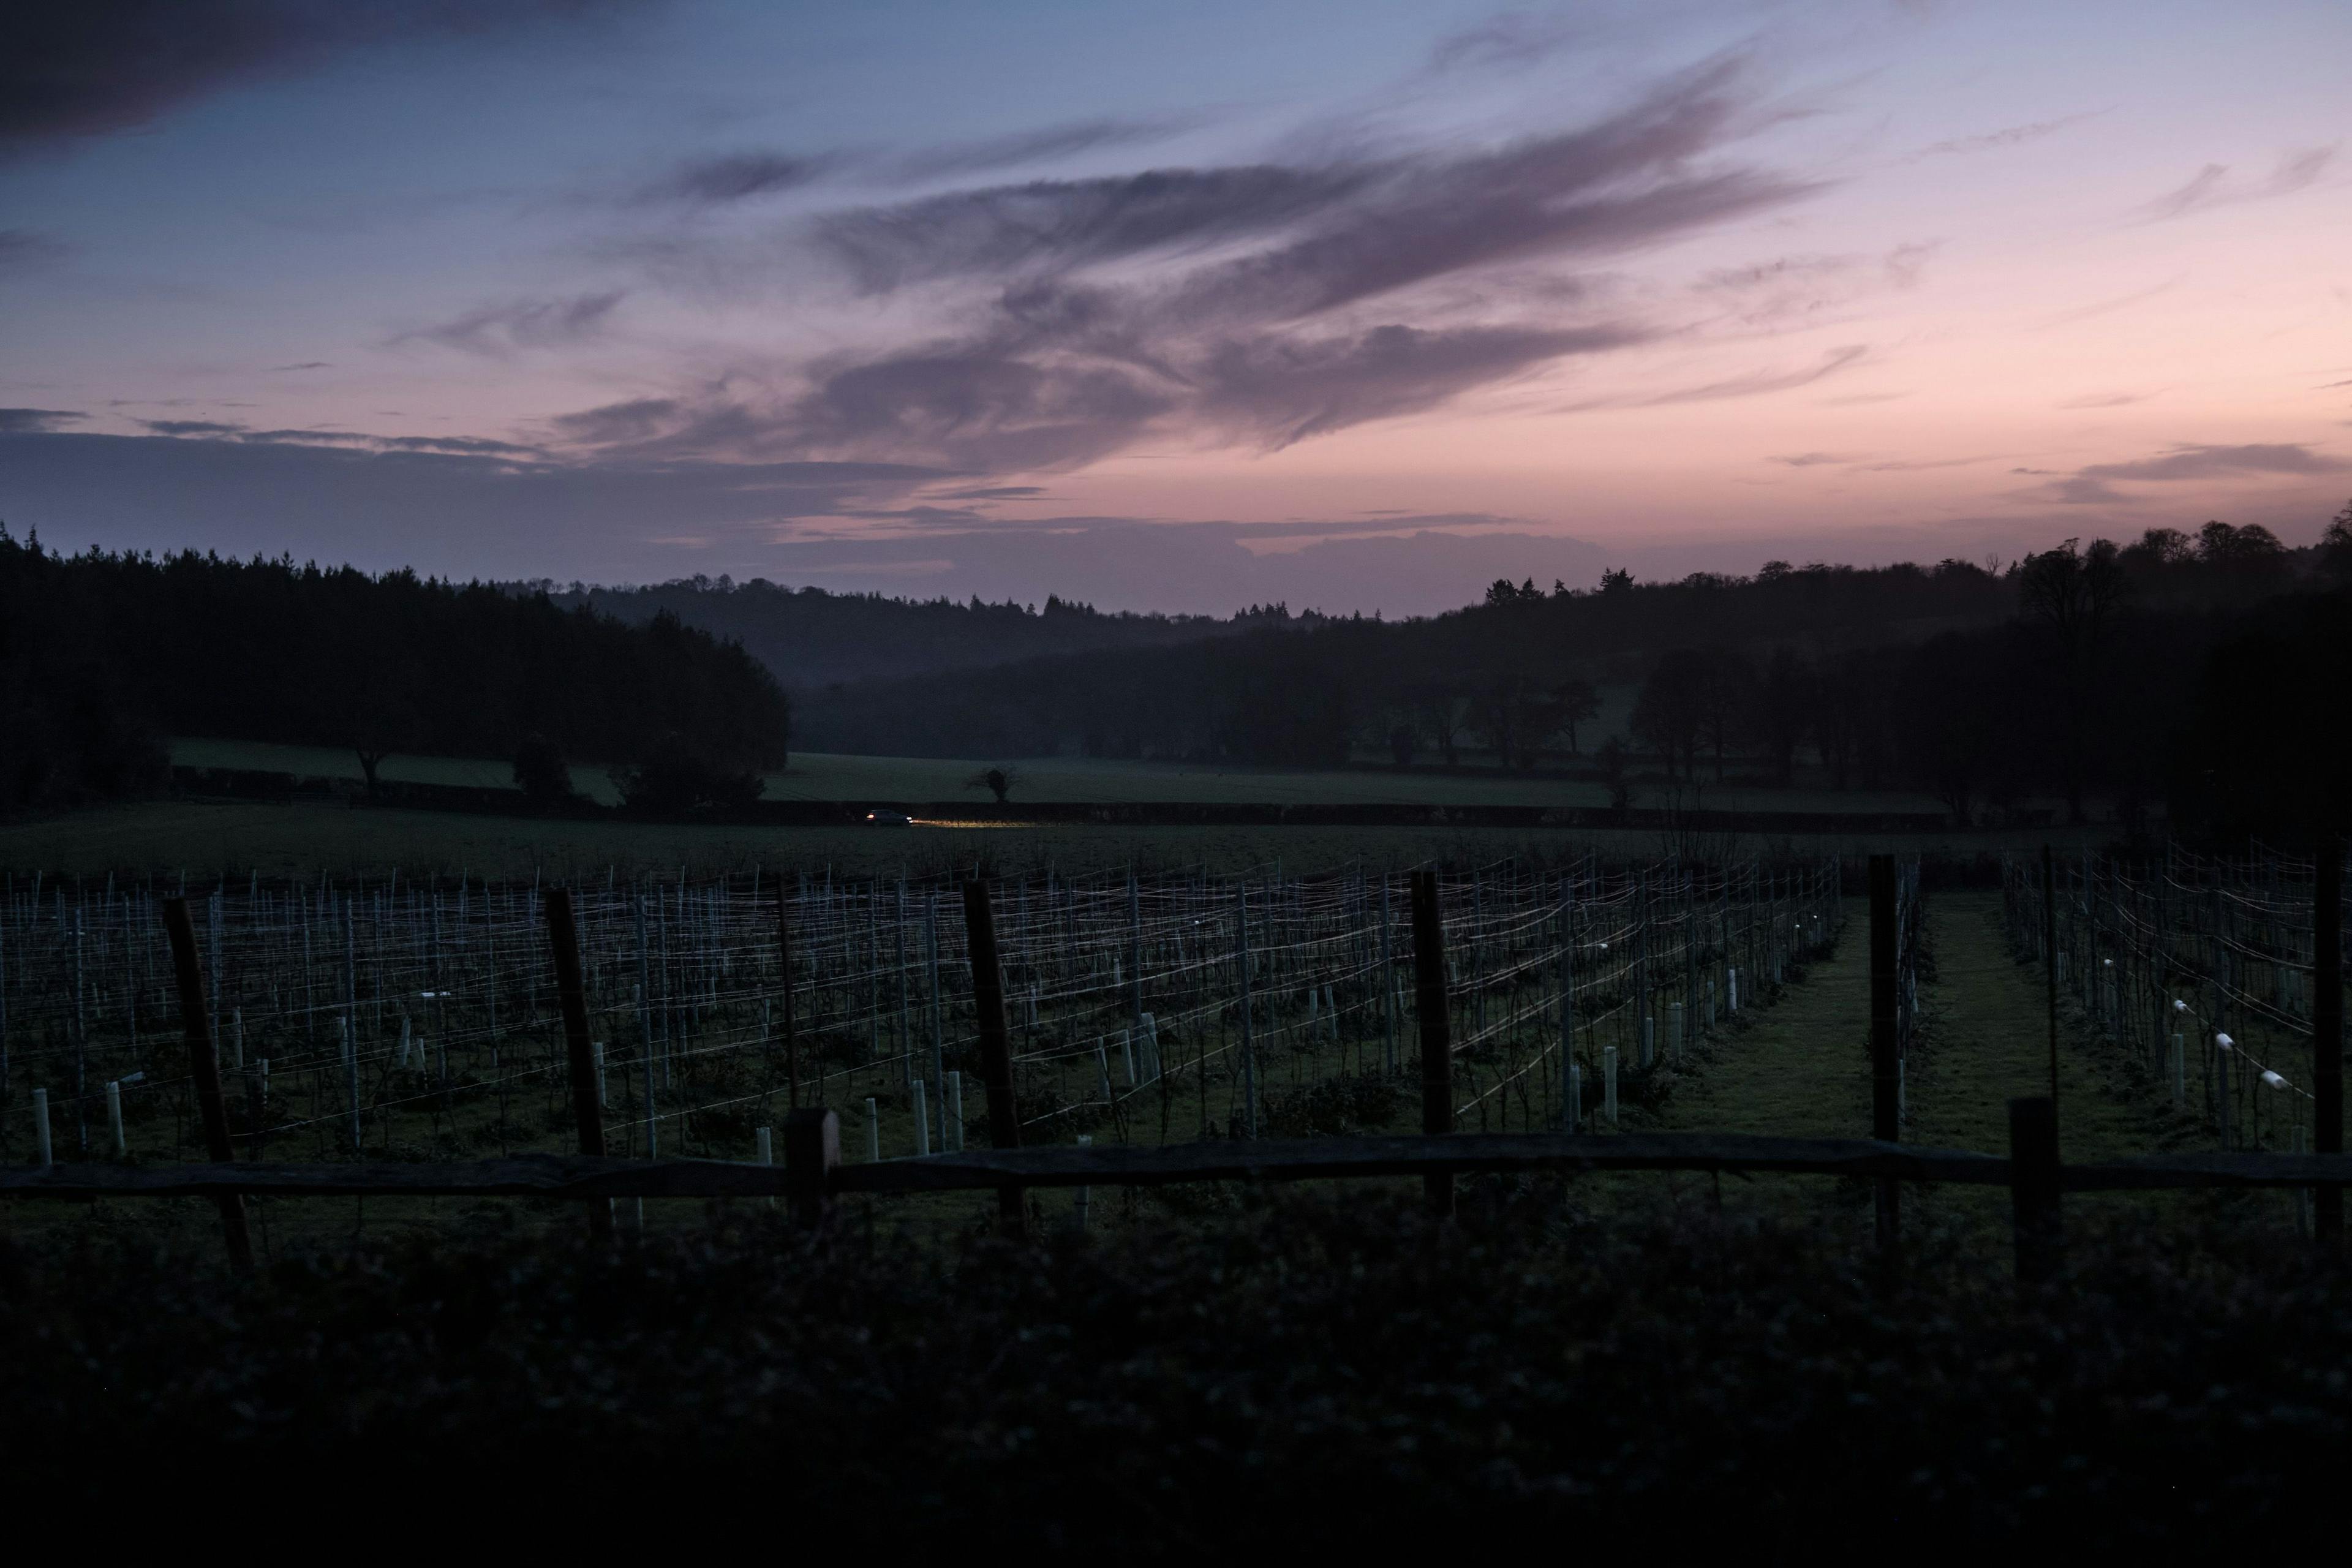 A view over the vineyards, with a car headlights in the horizon.